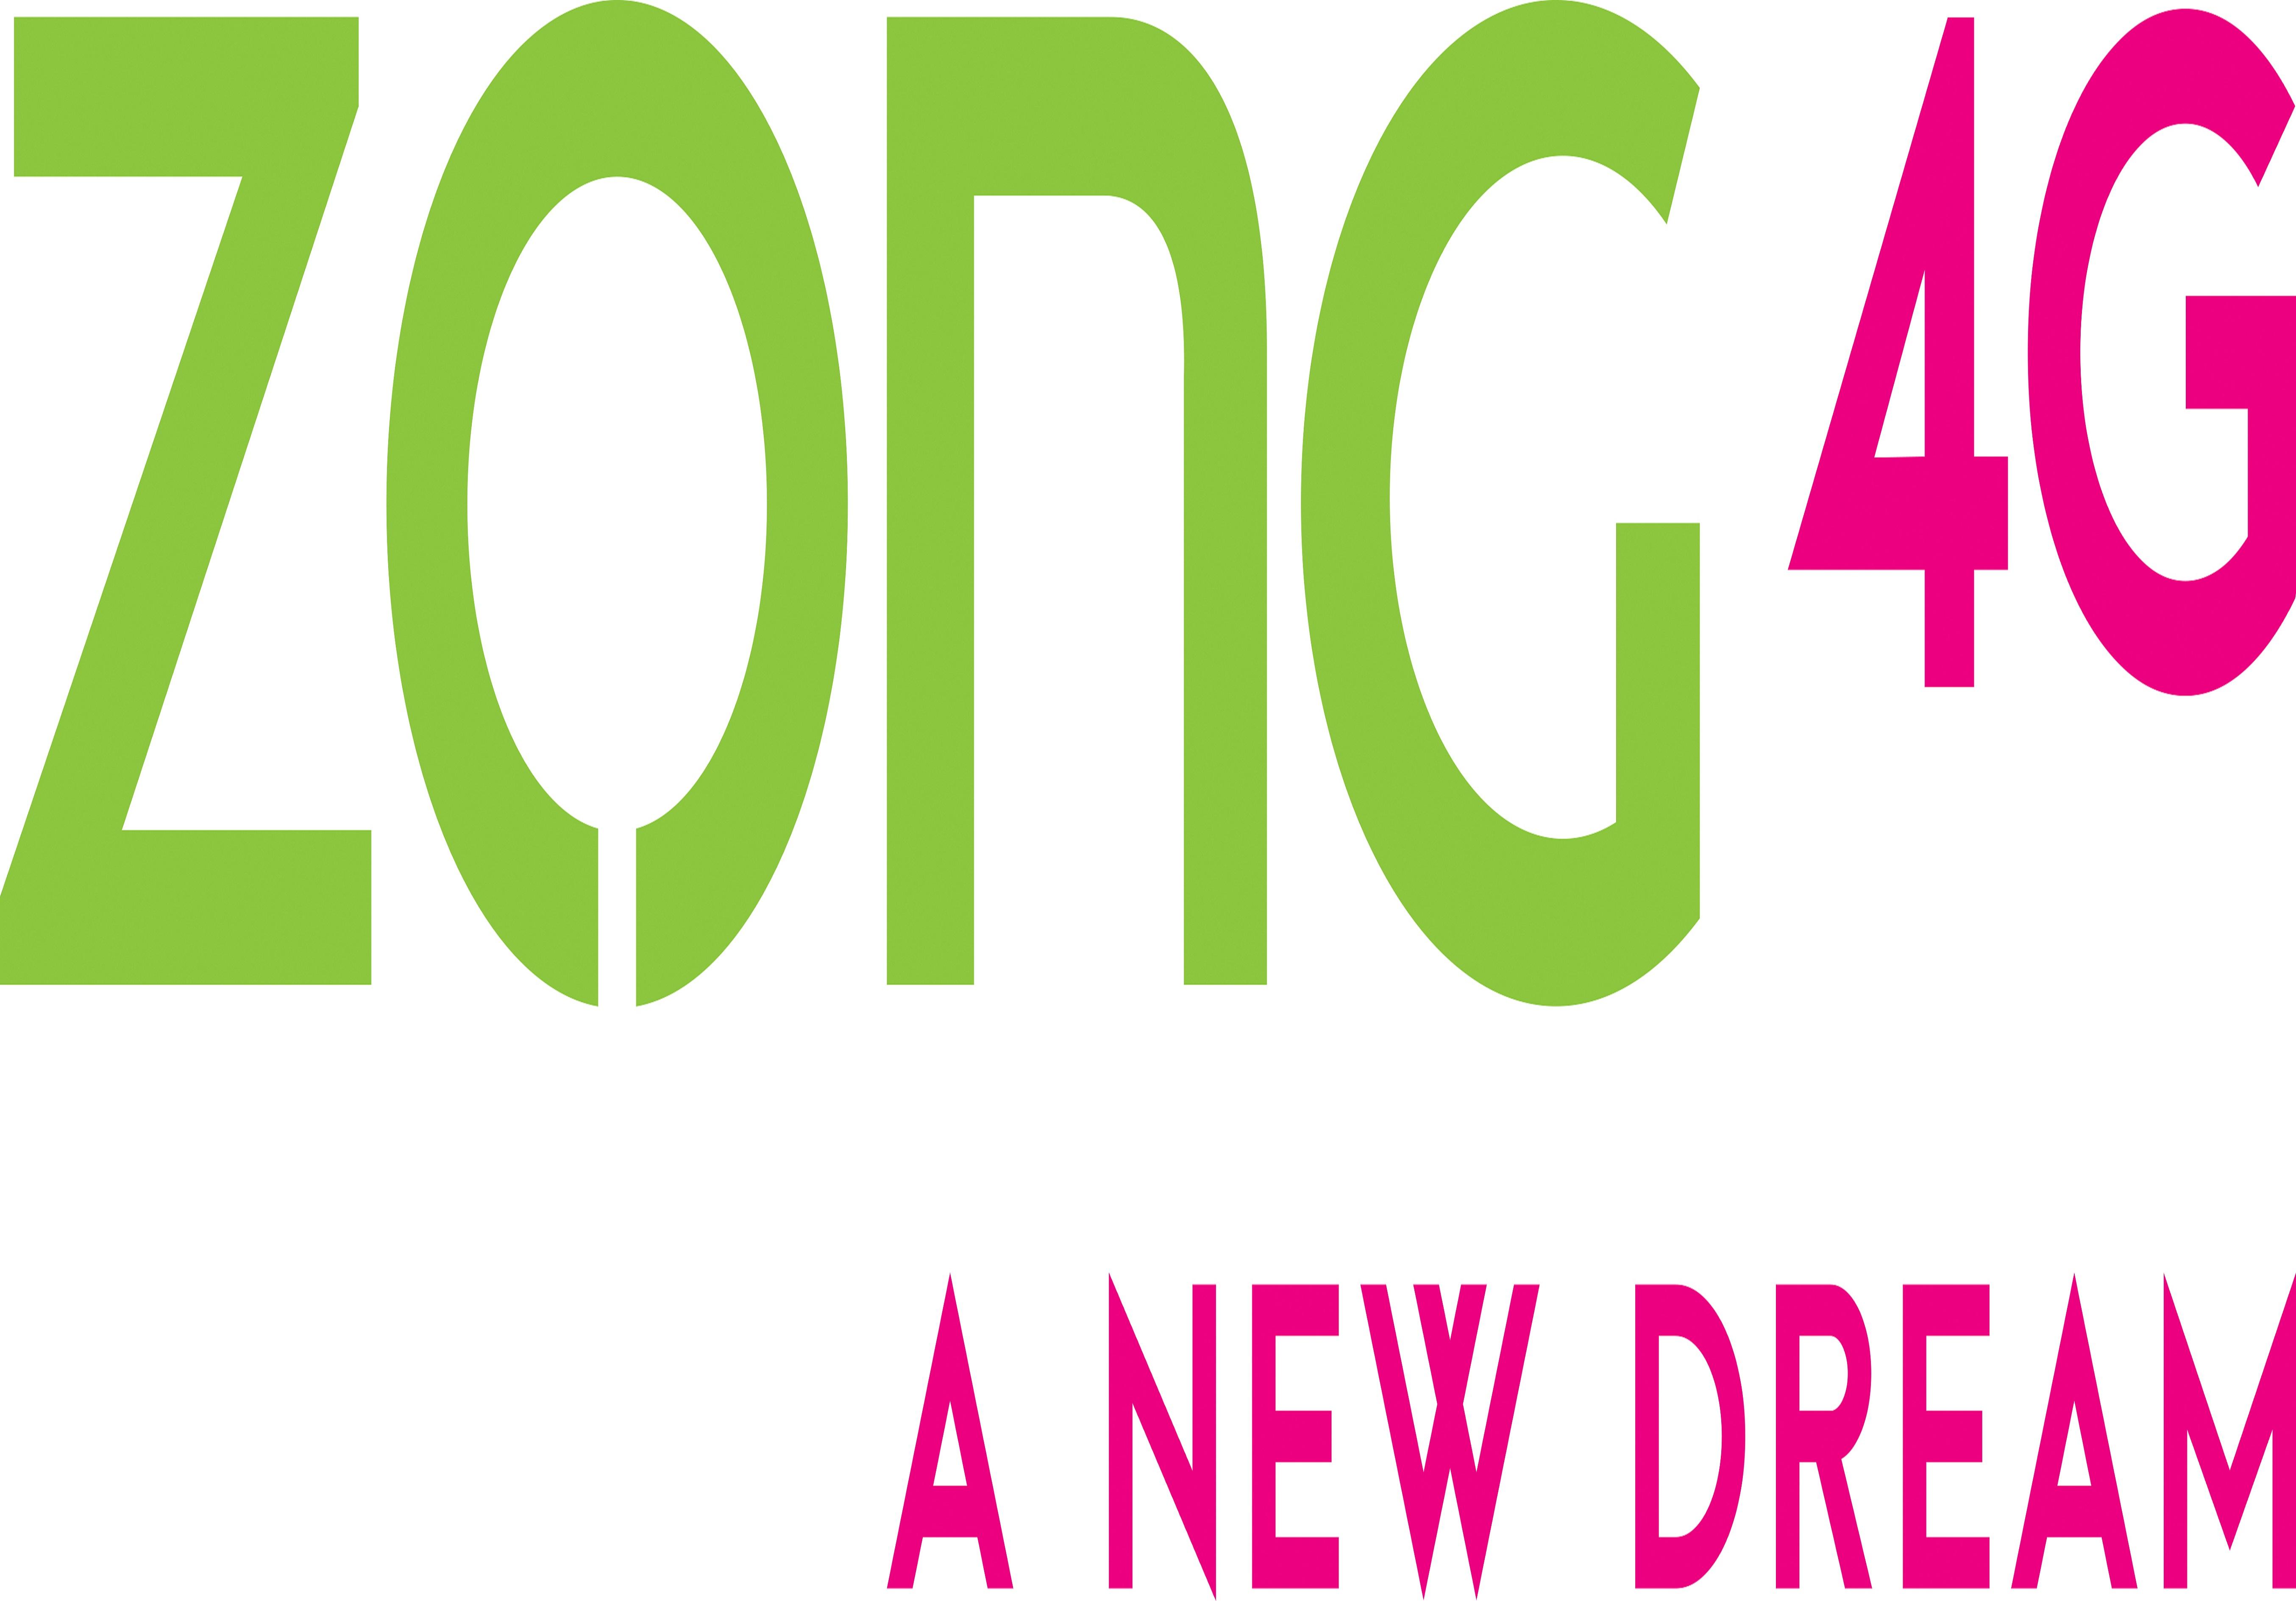 Zong 4G executes fastest site rollout of 2018